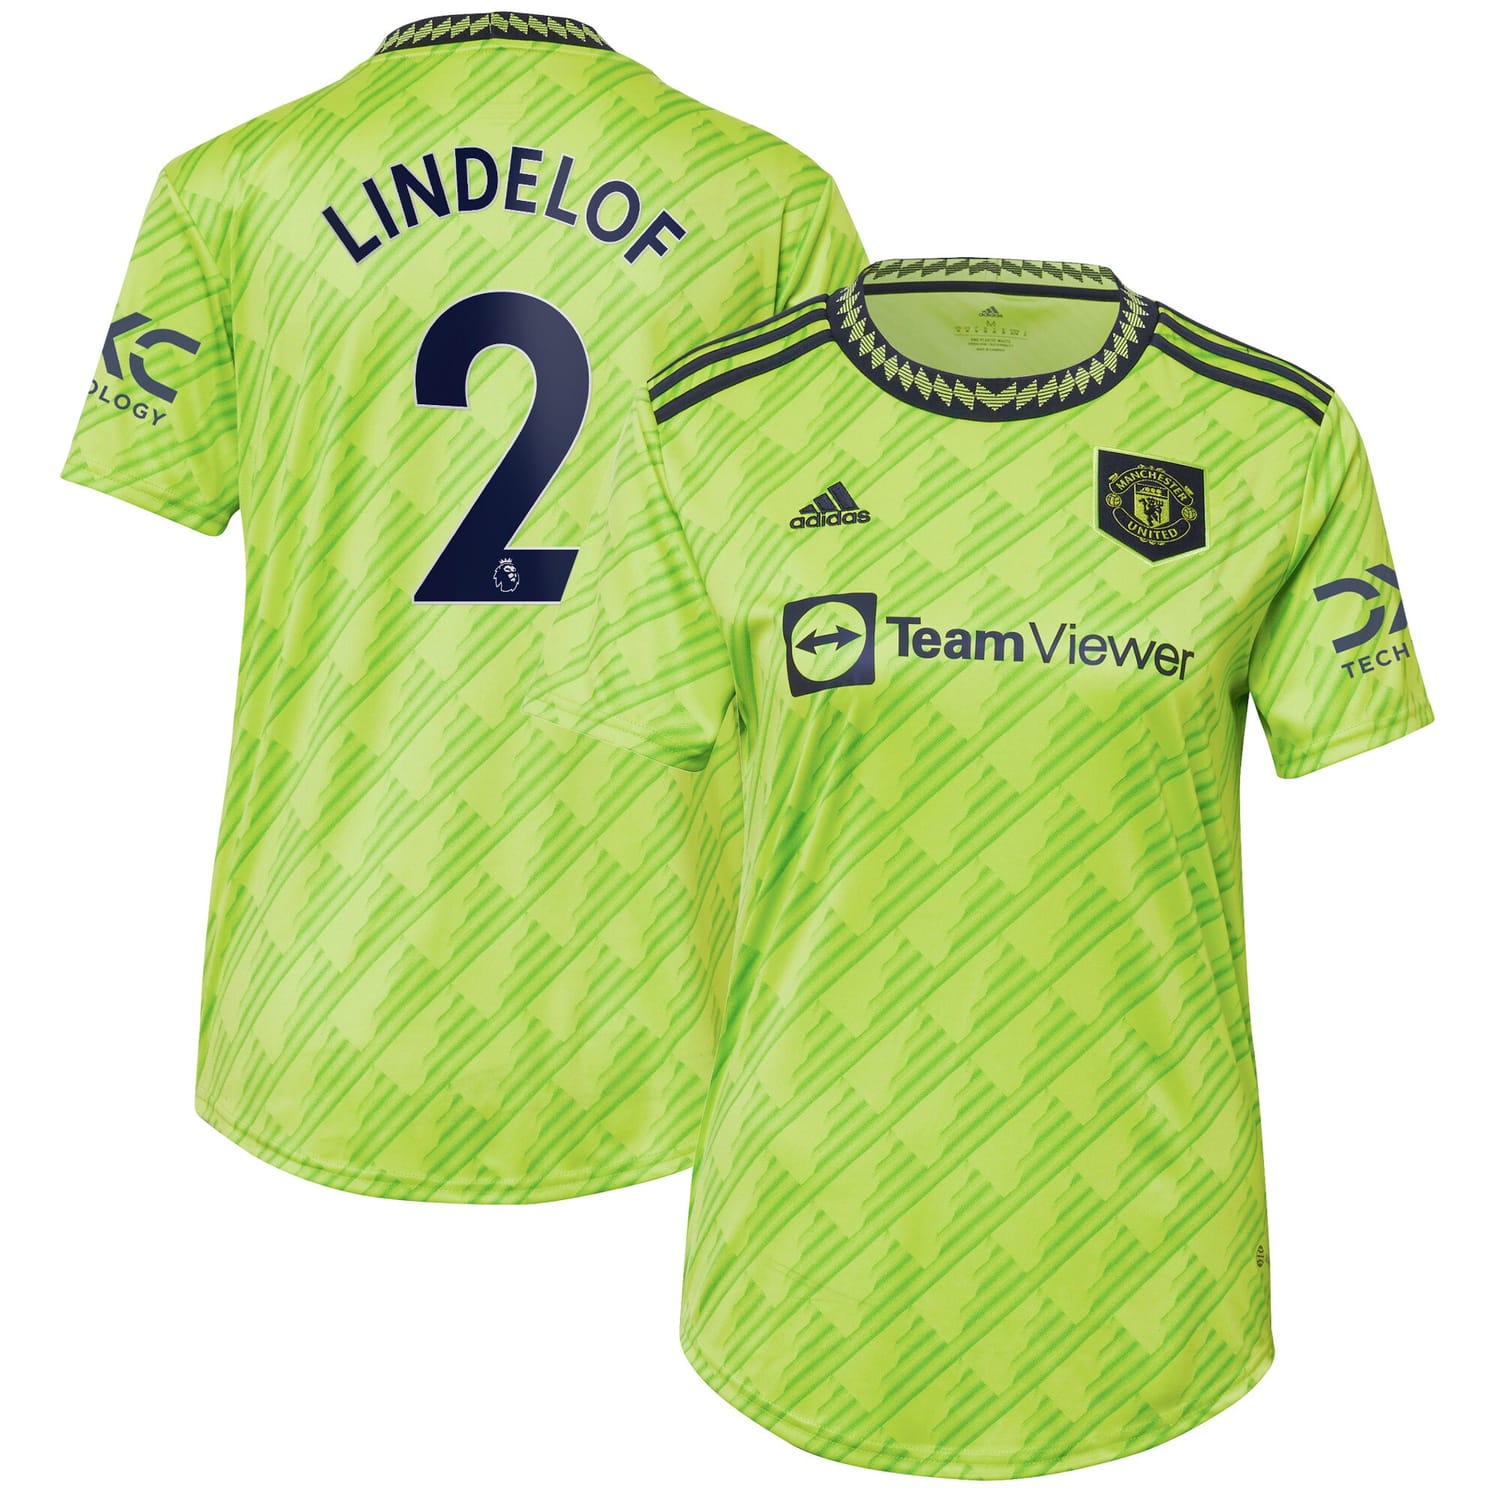 Premier League Manchester United Third Jersey Shirt Neon Green 2022-23 player Victor Lindelöf printing for Women